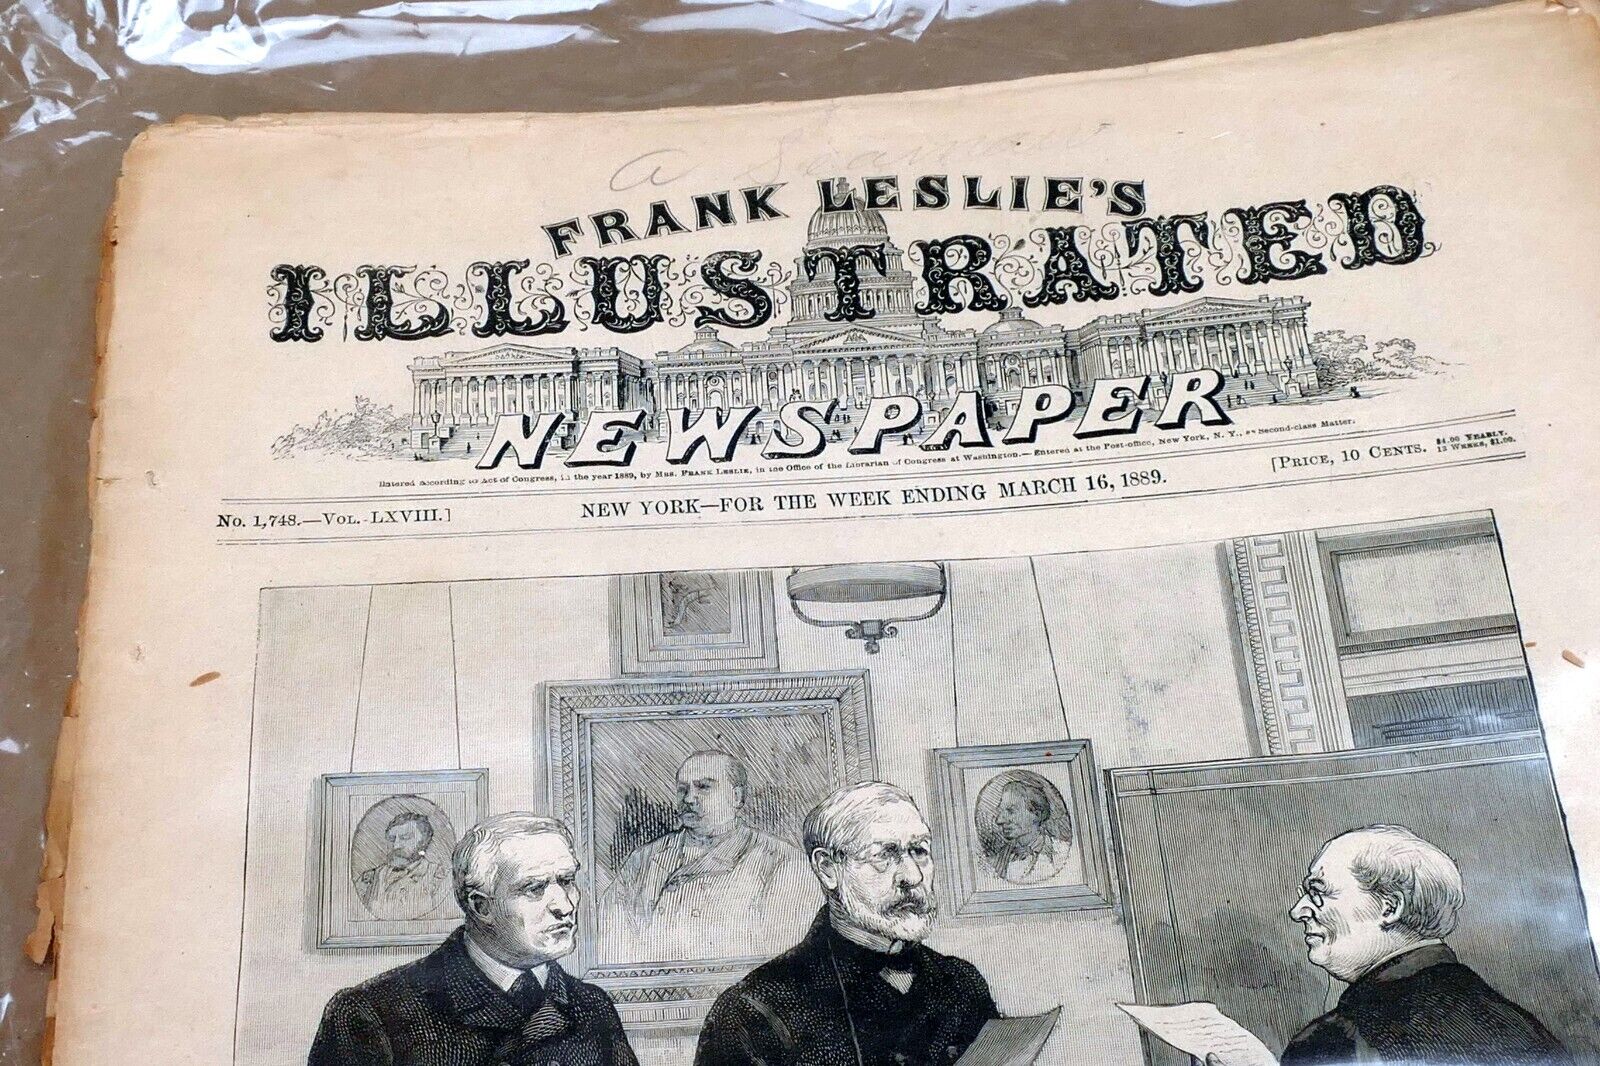 Frank Leslie's Illustrated Newspaper March 16, 1889 New York